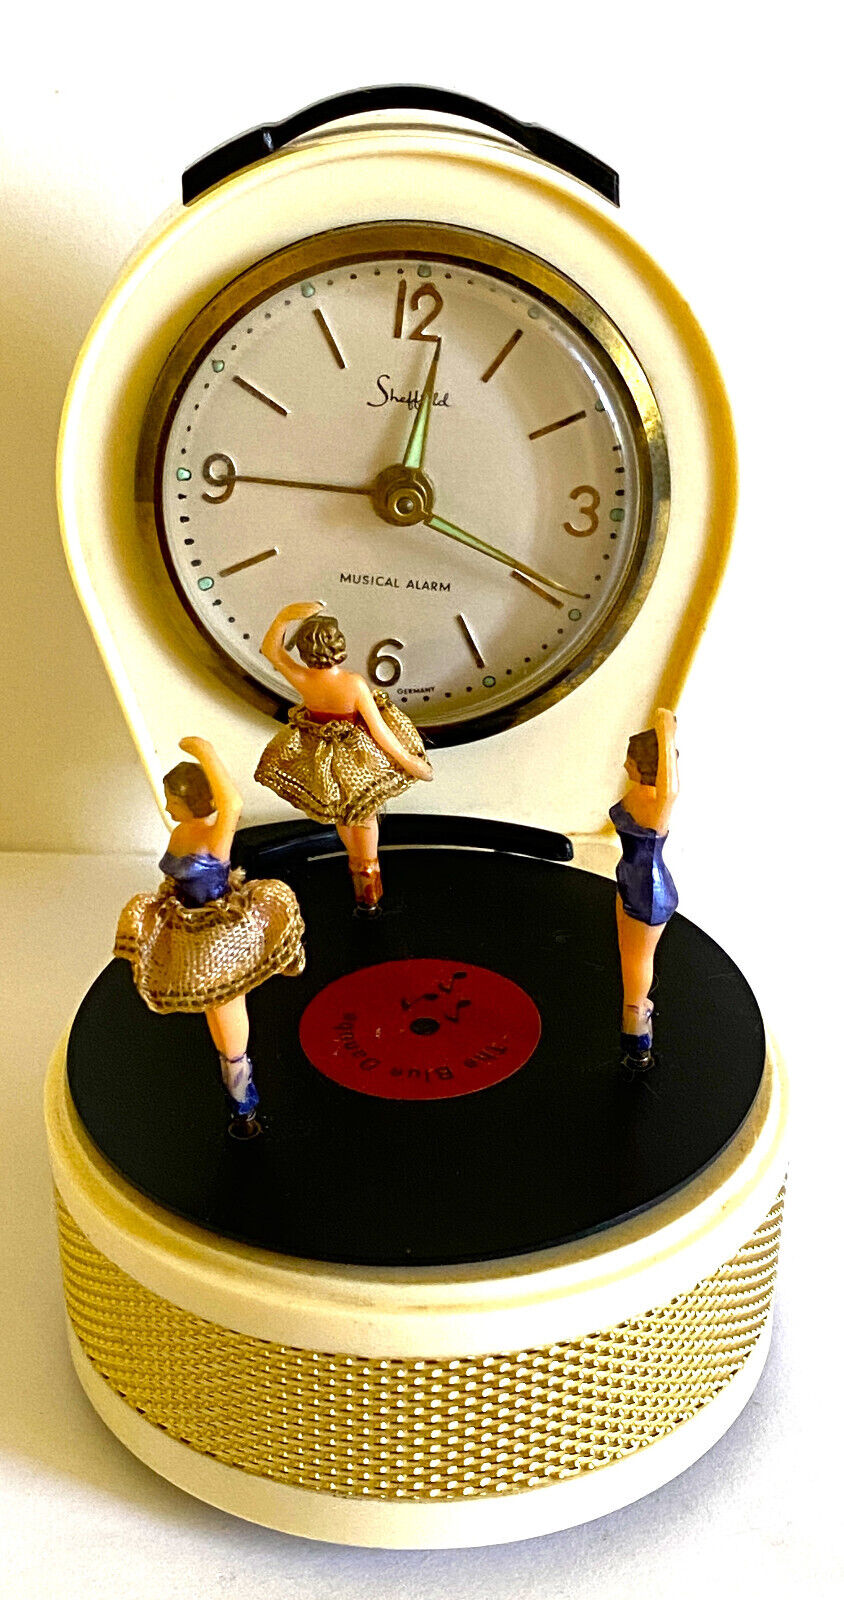 Sheffield Musical Record Player Alarm Clock Automation Dancers West Germany.